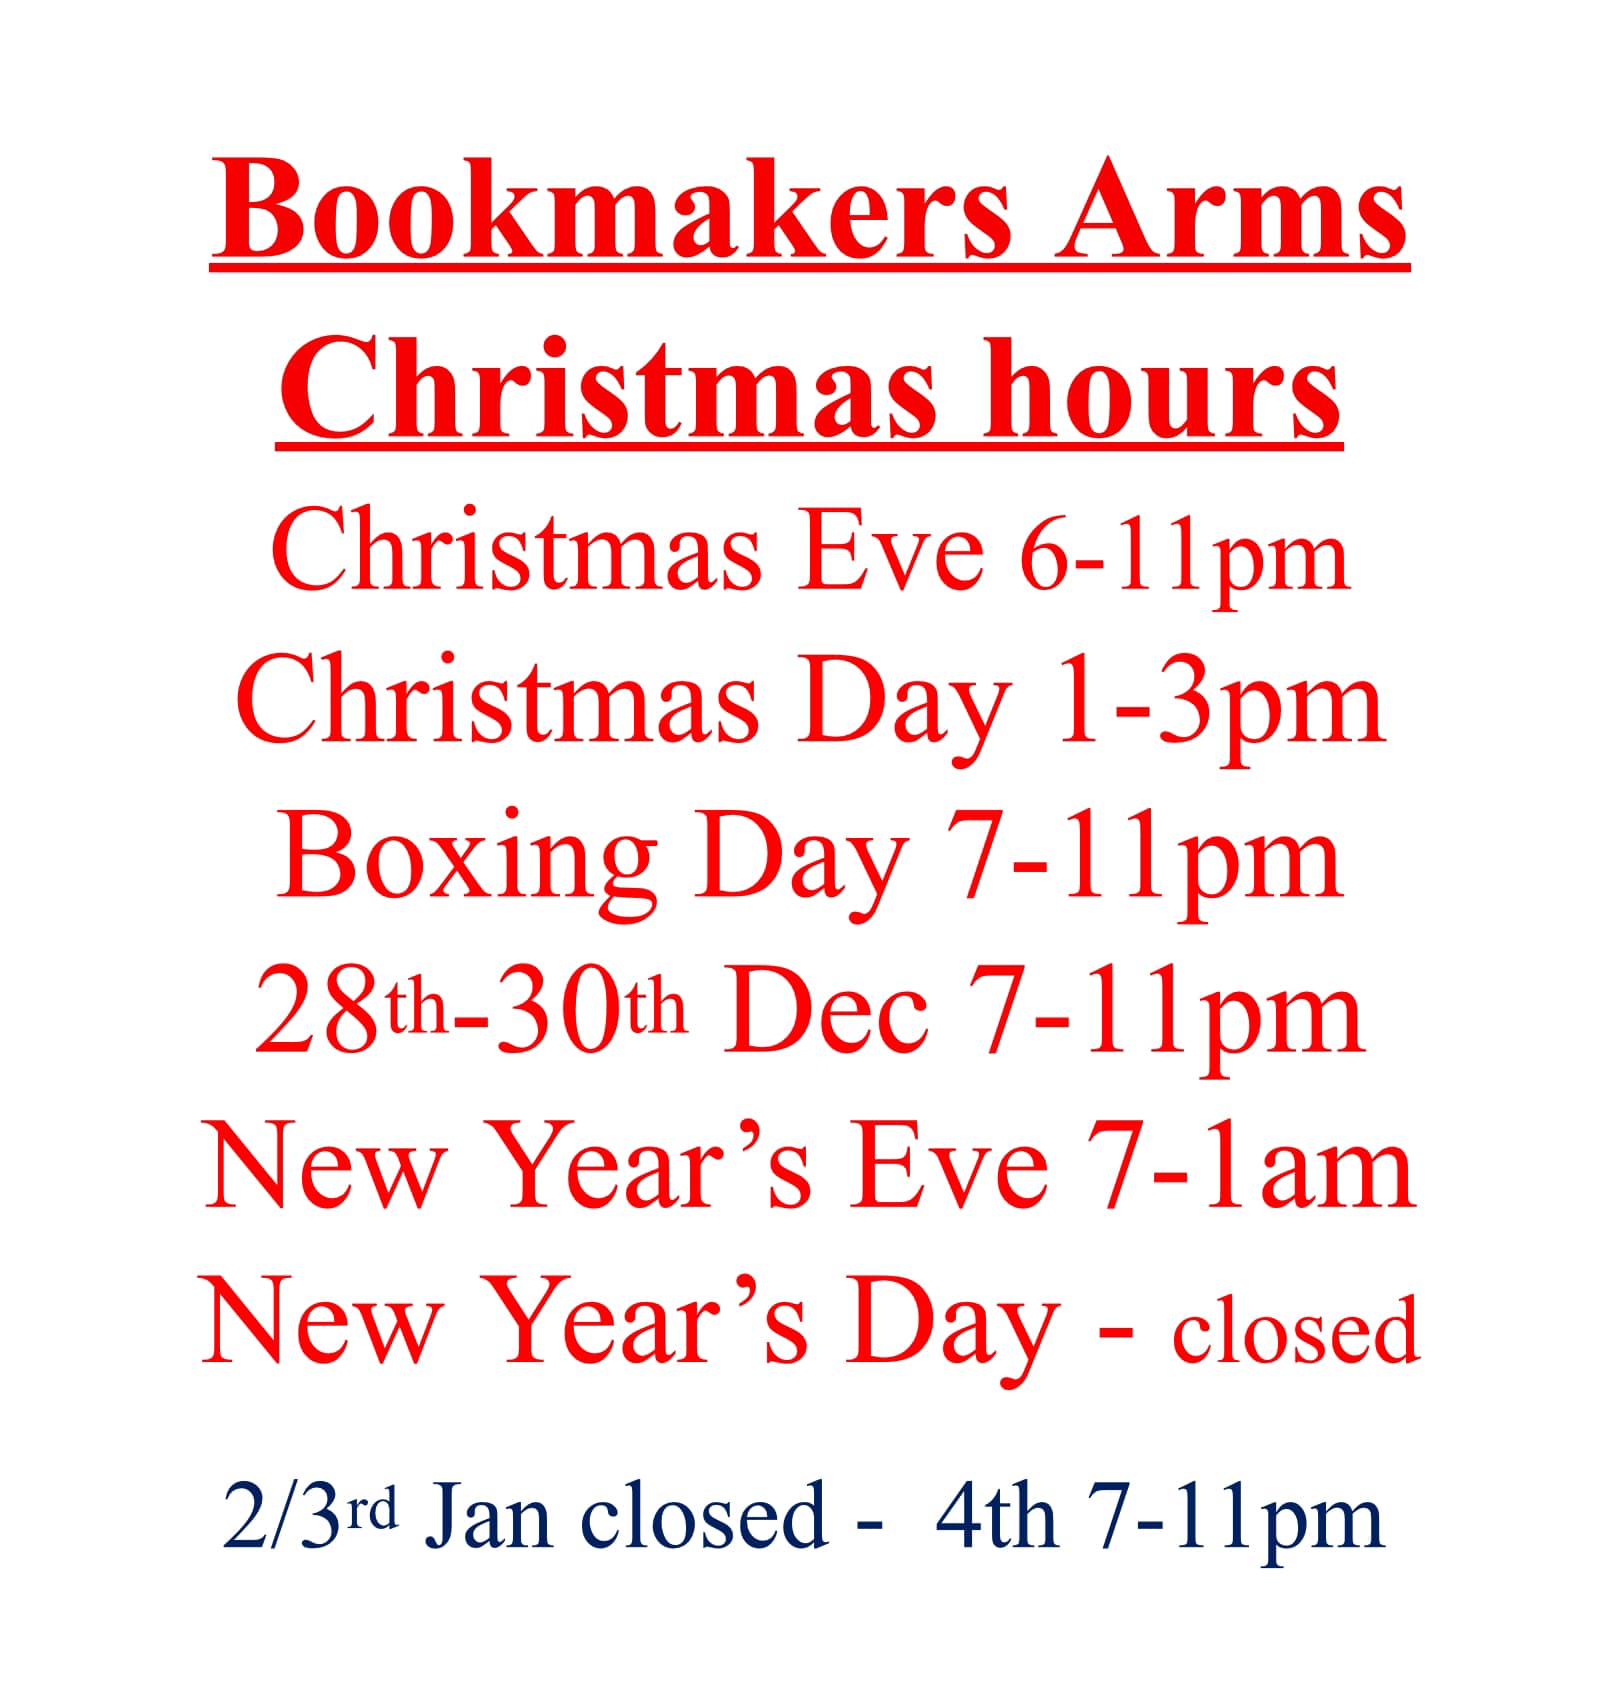 Bookmakers Arms